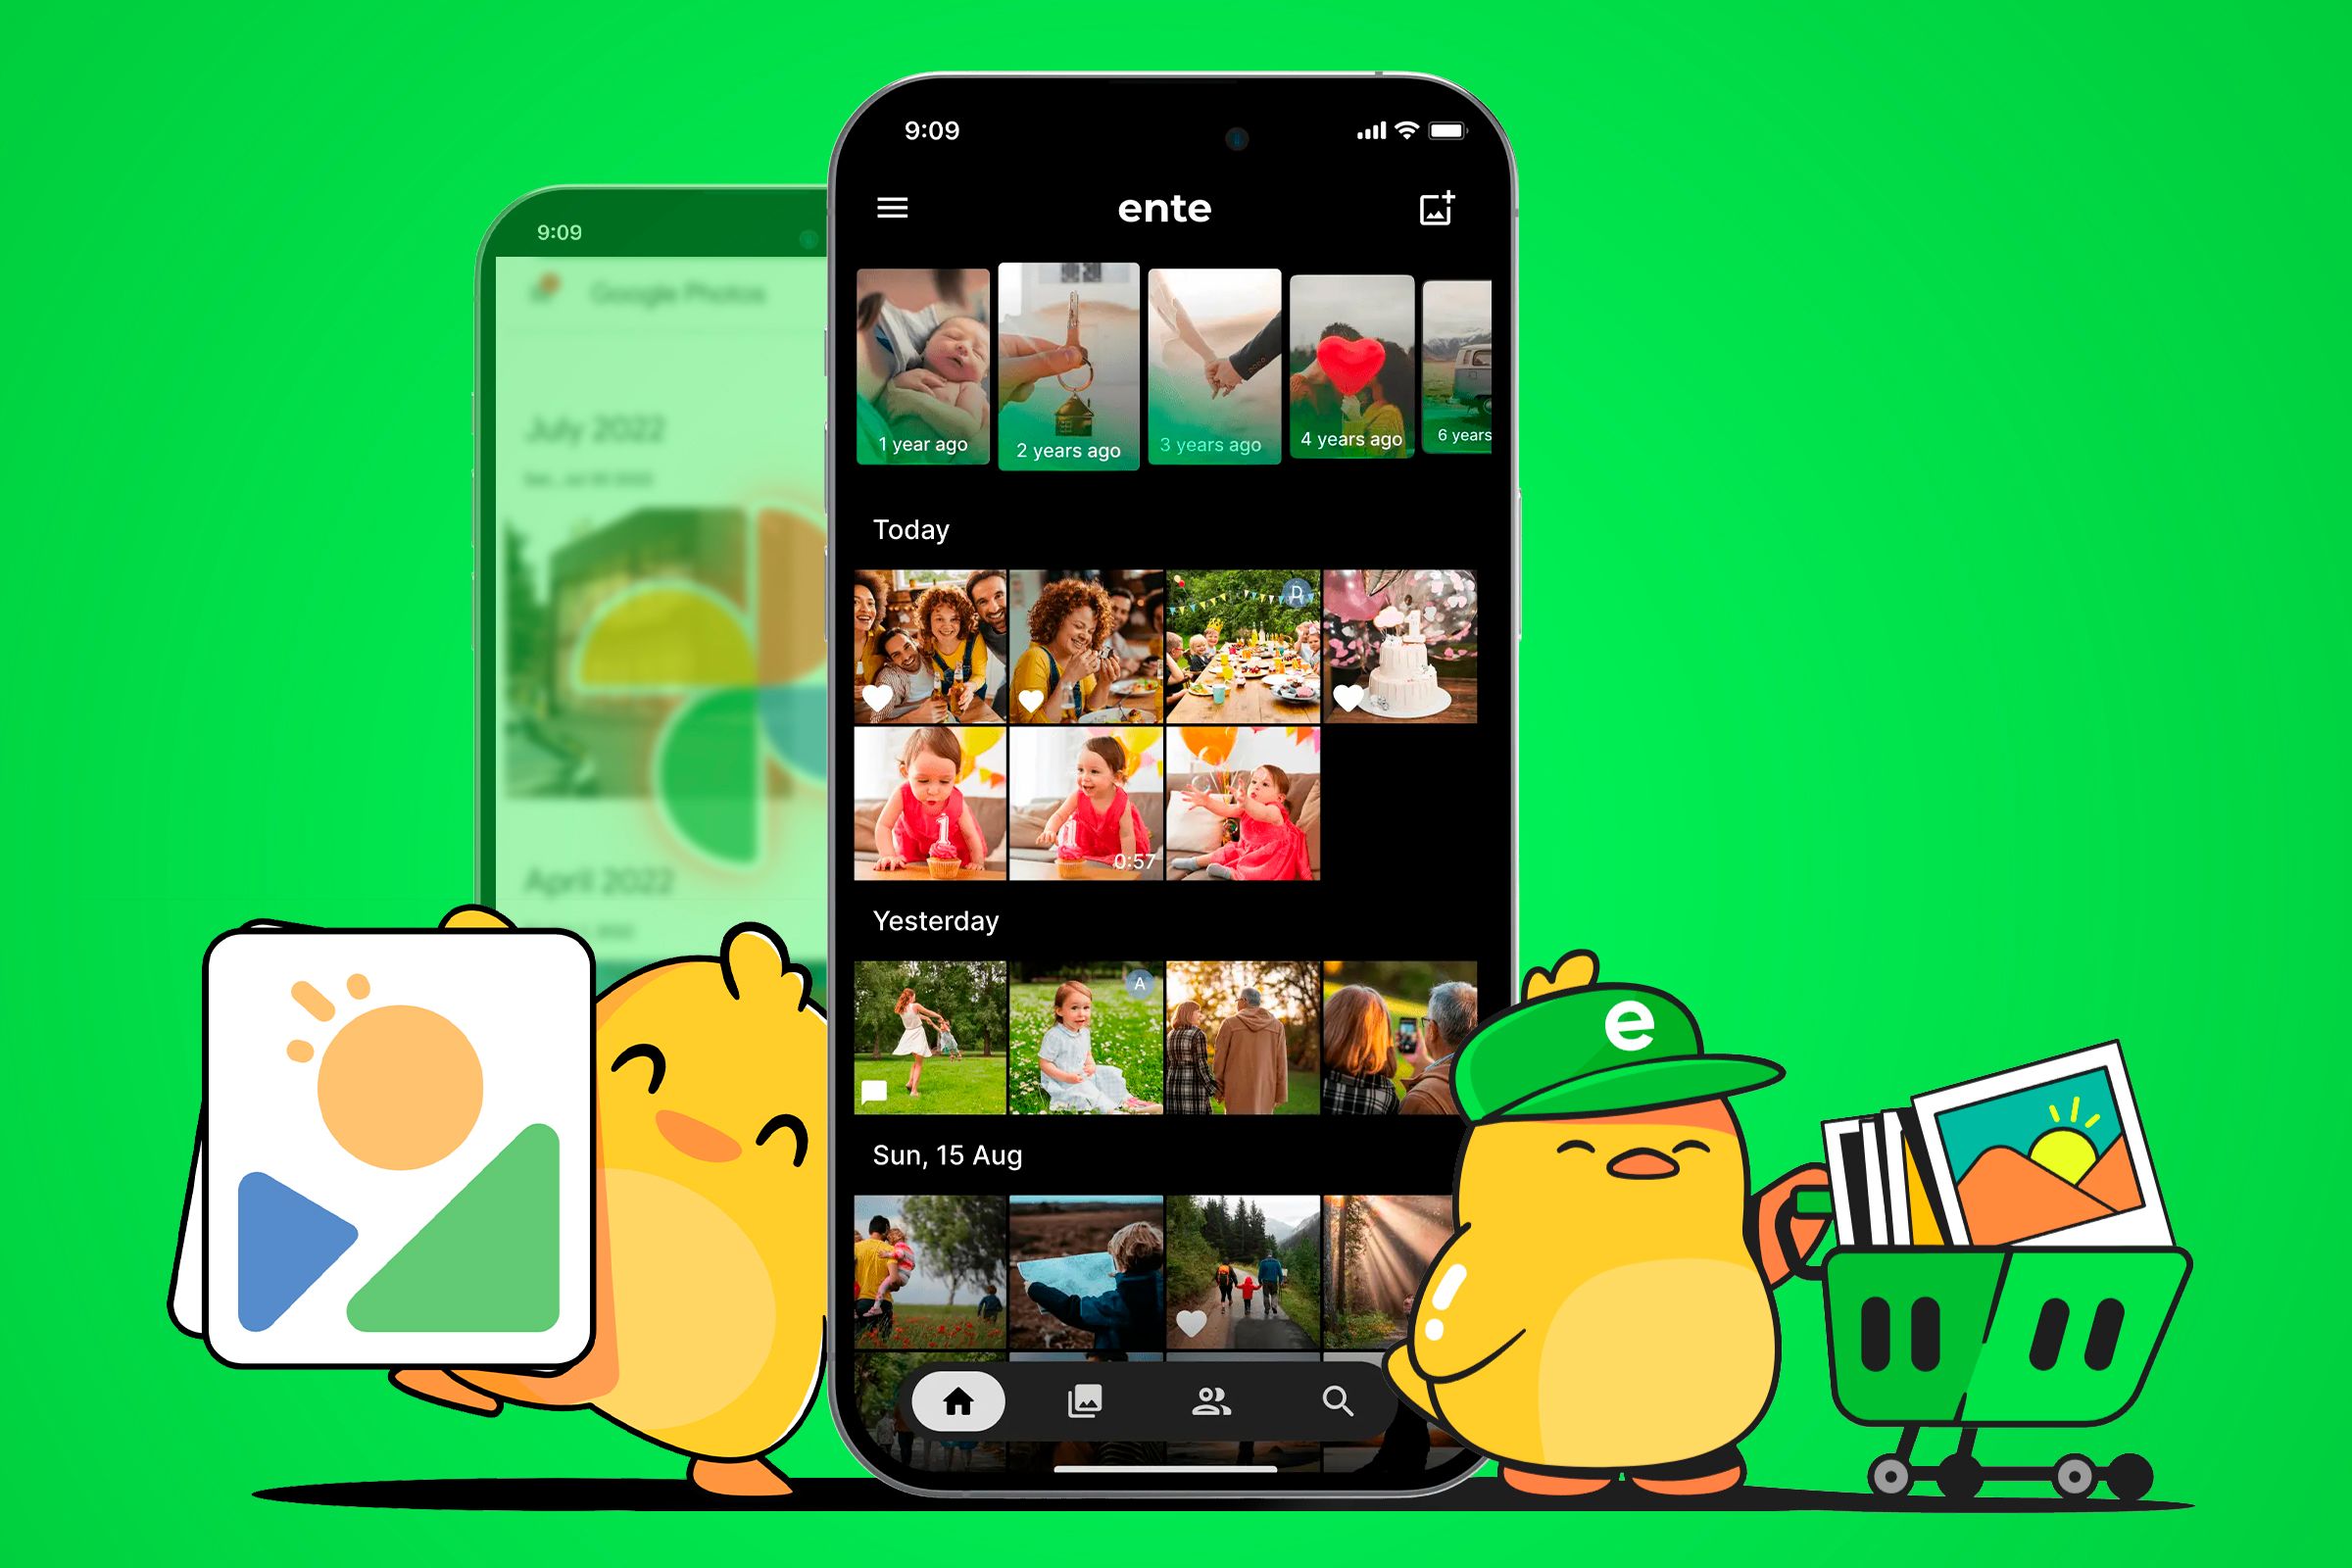 Ente app on the smartphone screen with its mascot beside it, and a blurred smartphone with Google Photos in the background